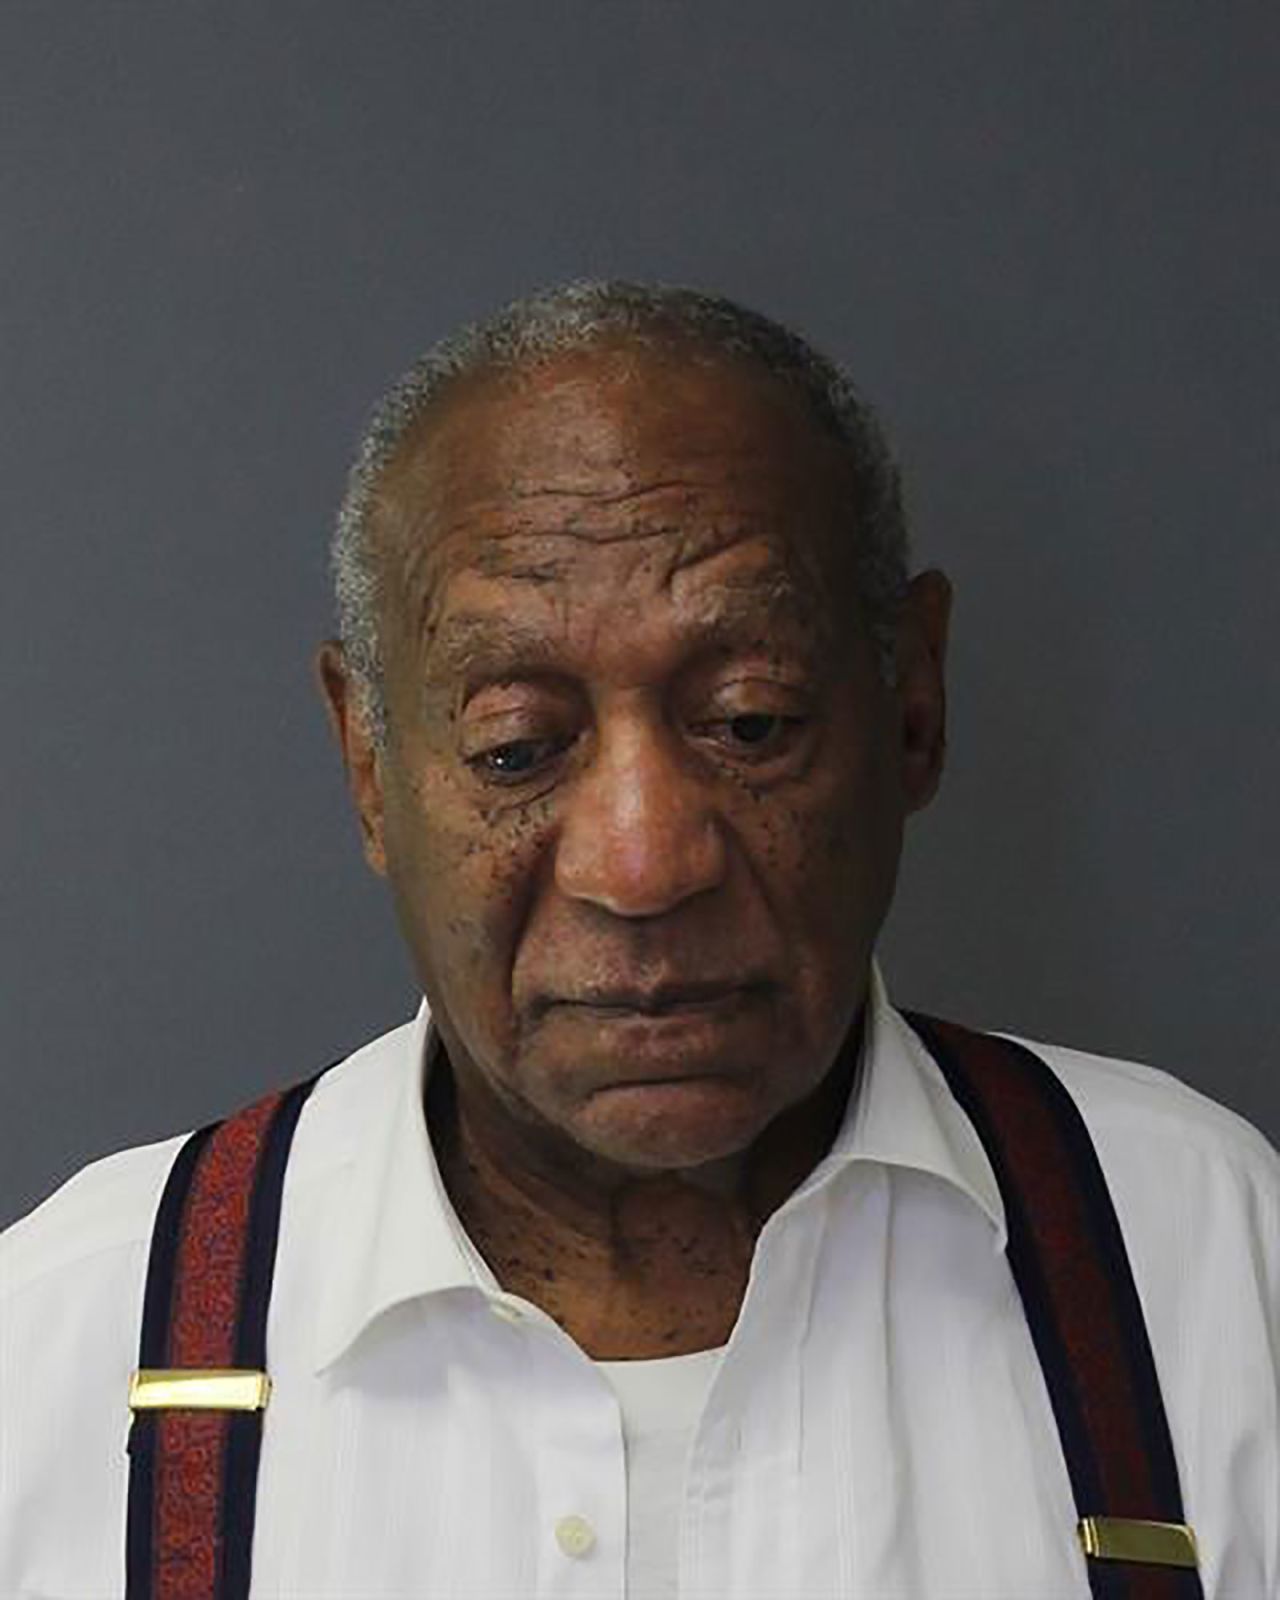 In September 2018, Cosby was convicted and sentenced to 3 to 10 years in state prison.